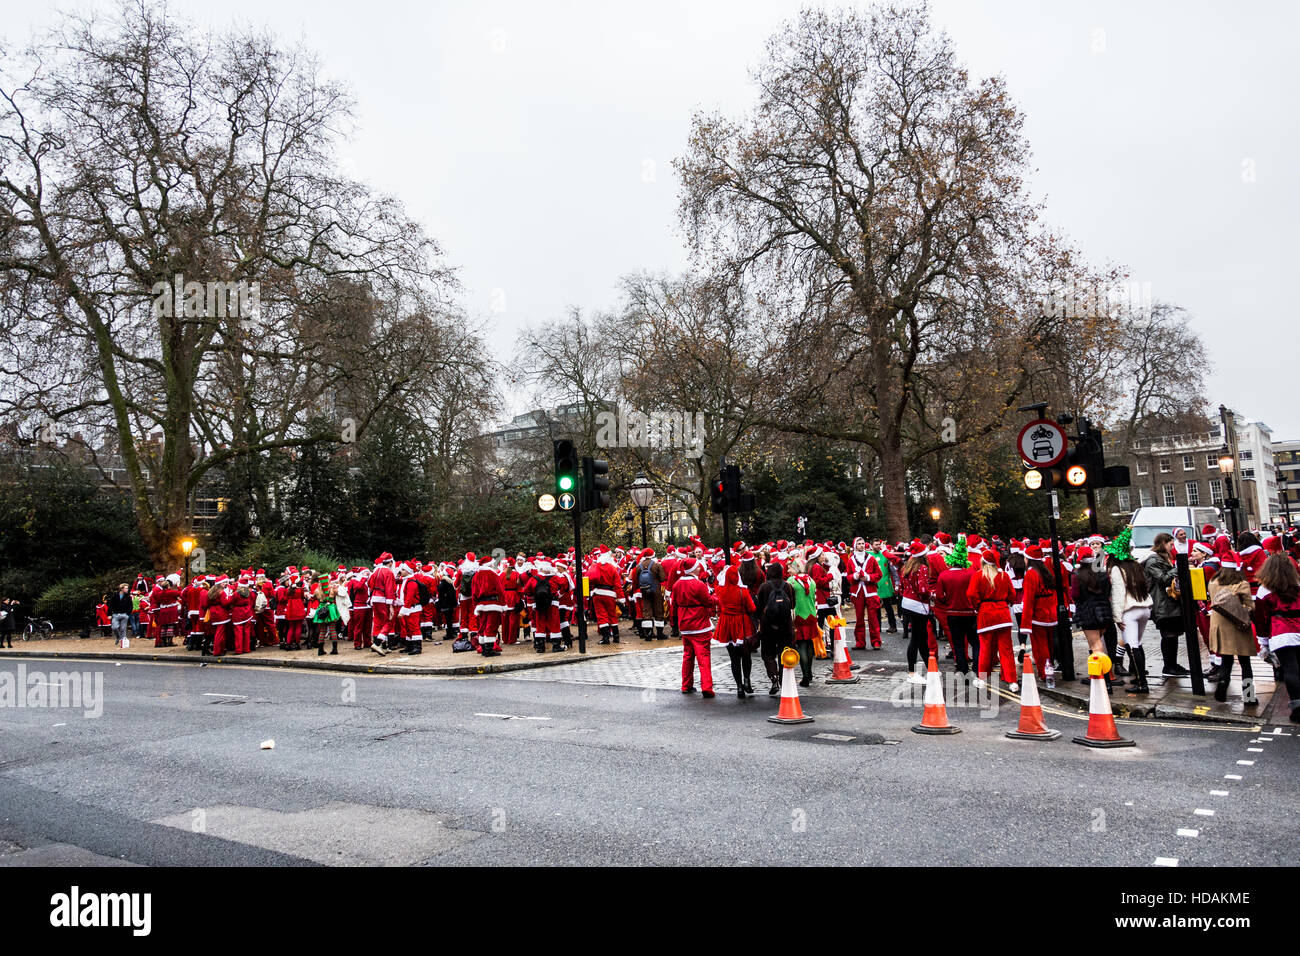 Santacon Santas on the streets of London. Santacon is a non-religious Christmas parade that normally takes place in London one Saturday each December. Stock Photo